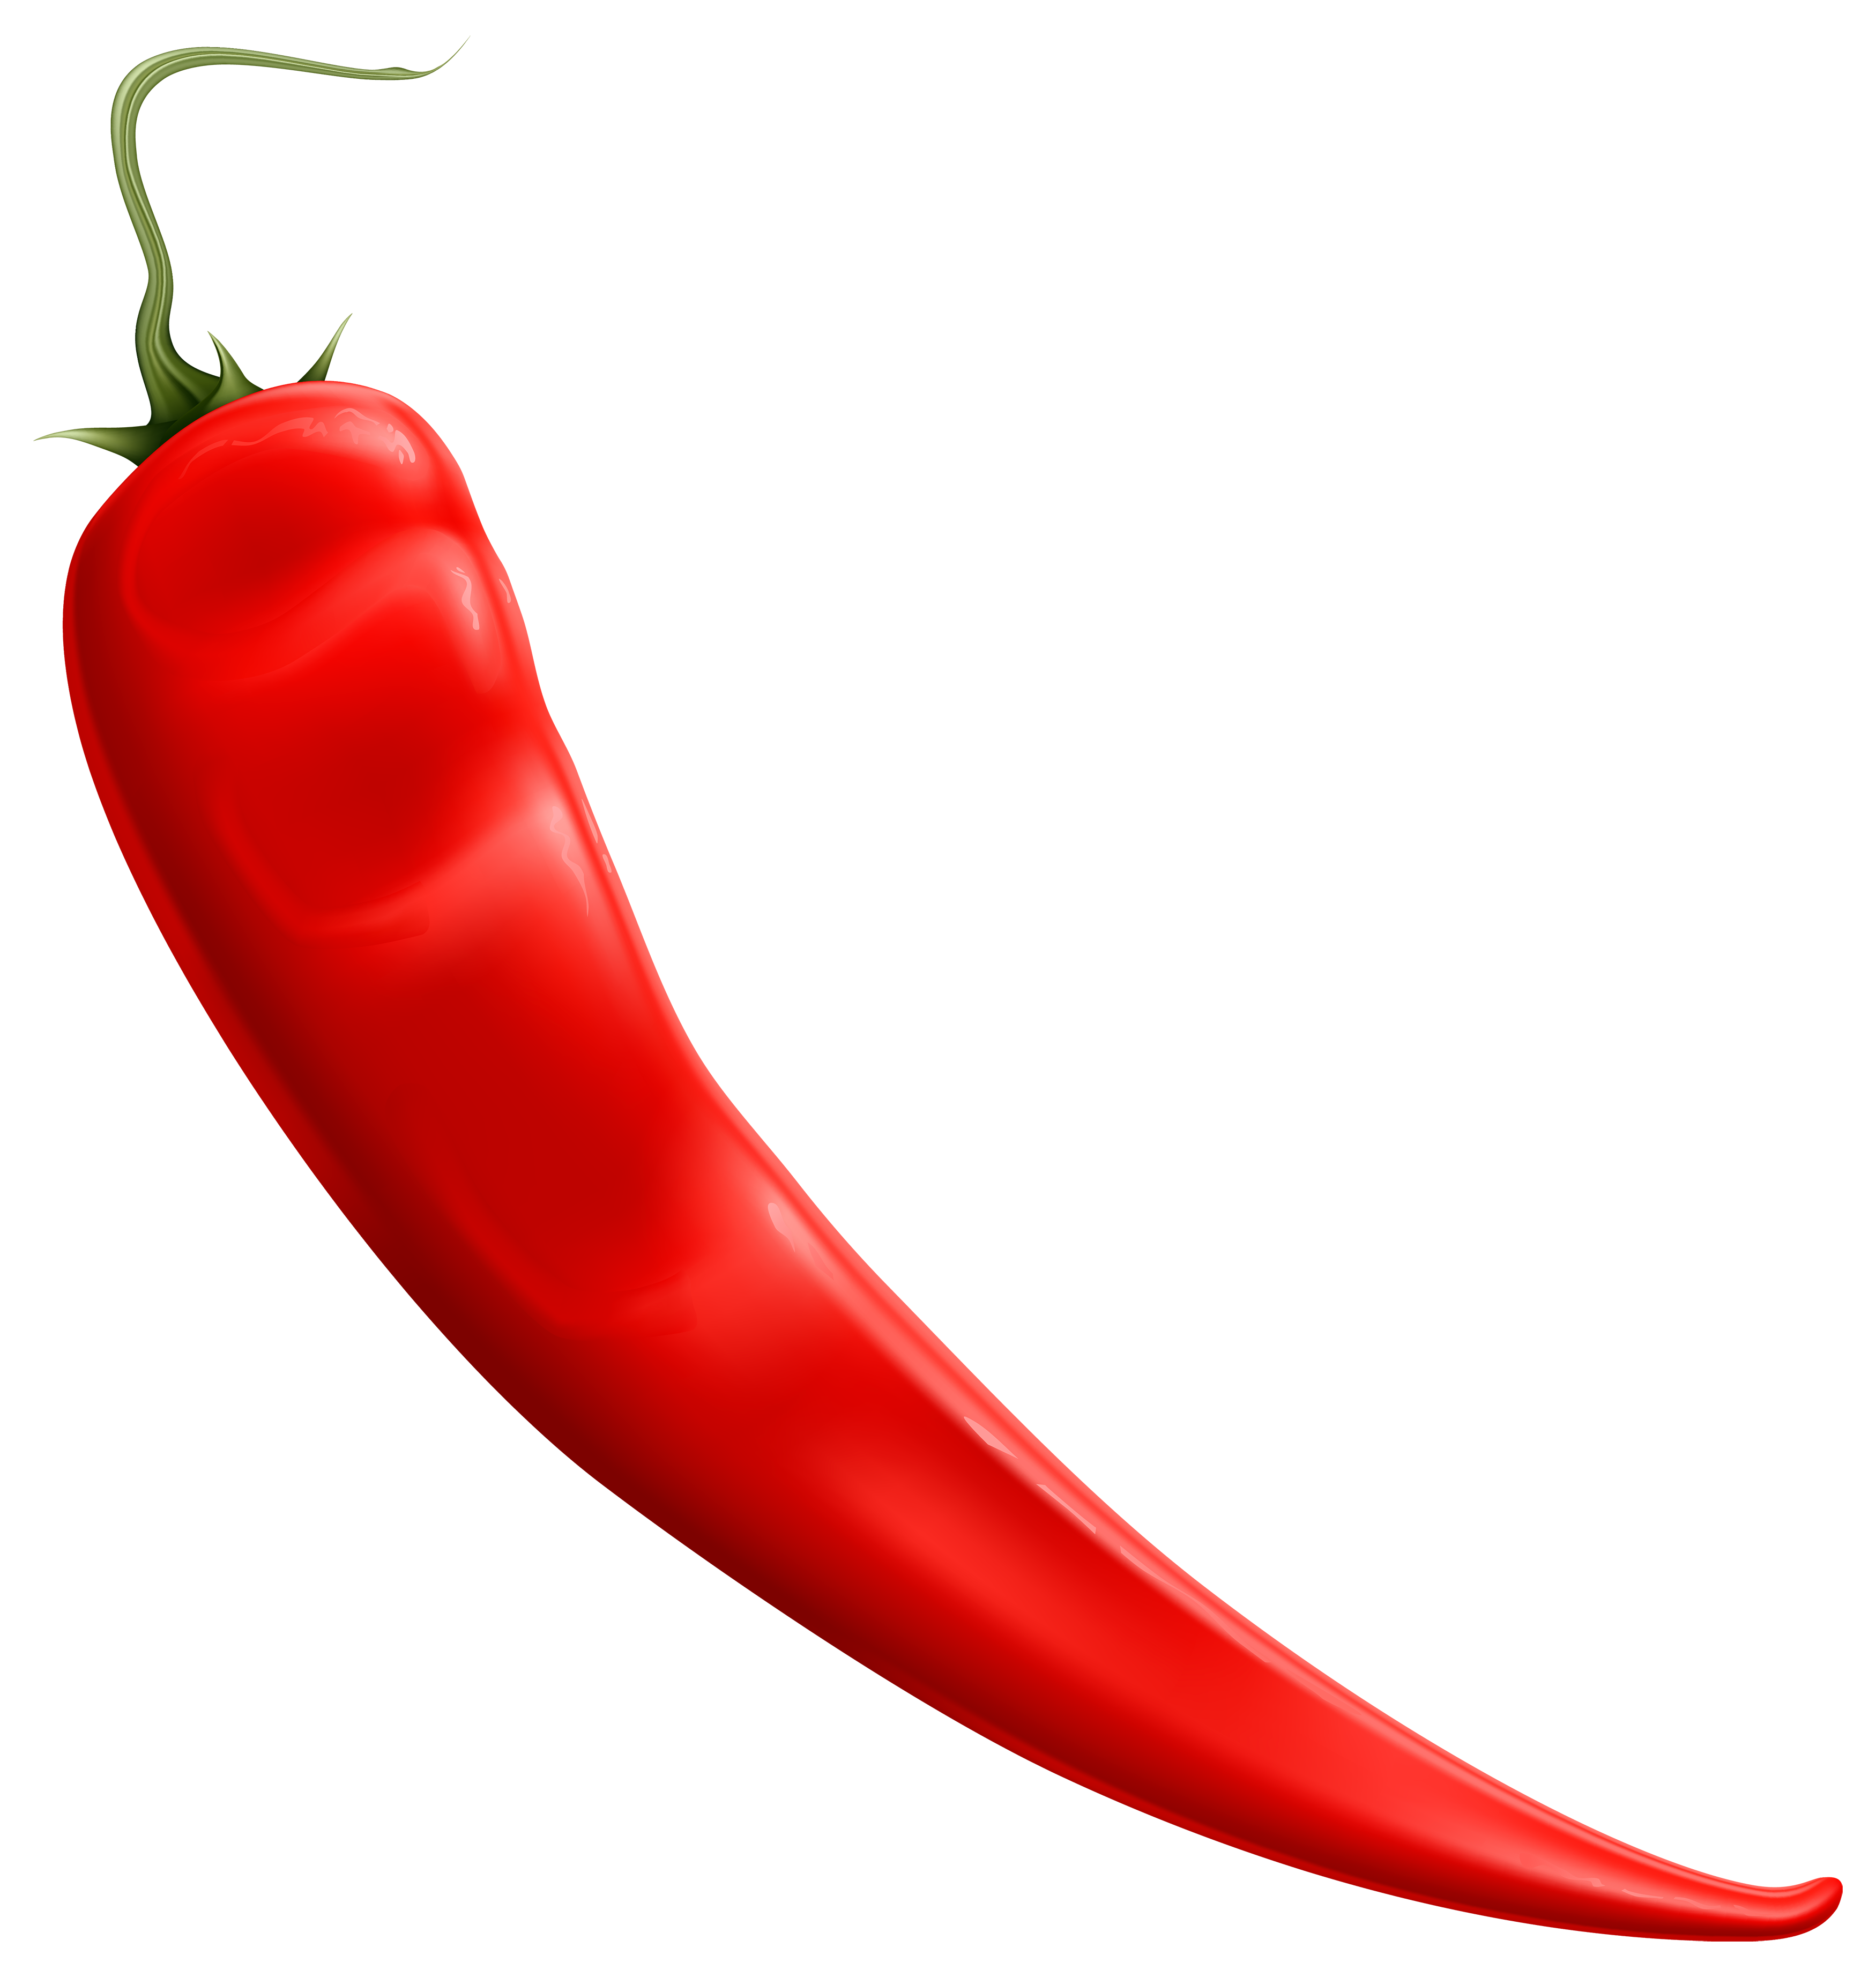 Red Chili Pepper PNG Clipart - Best WEB Clipart